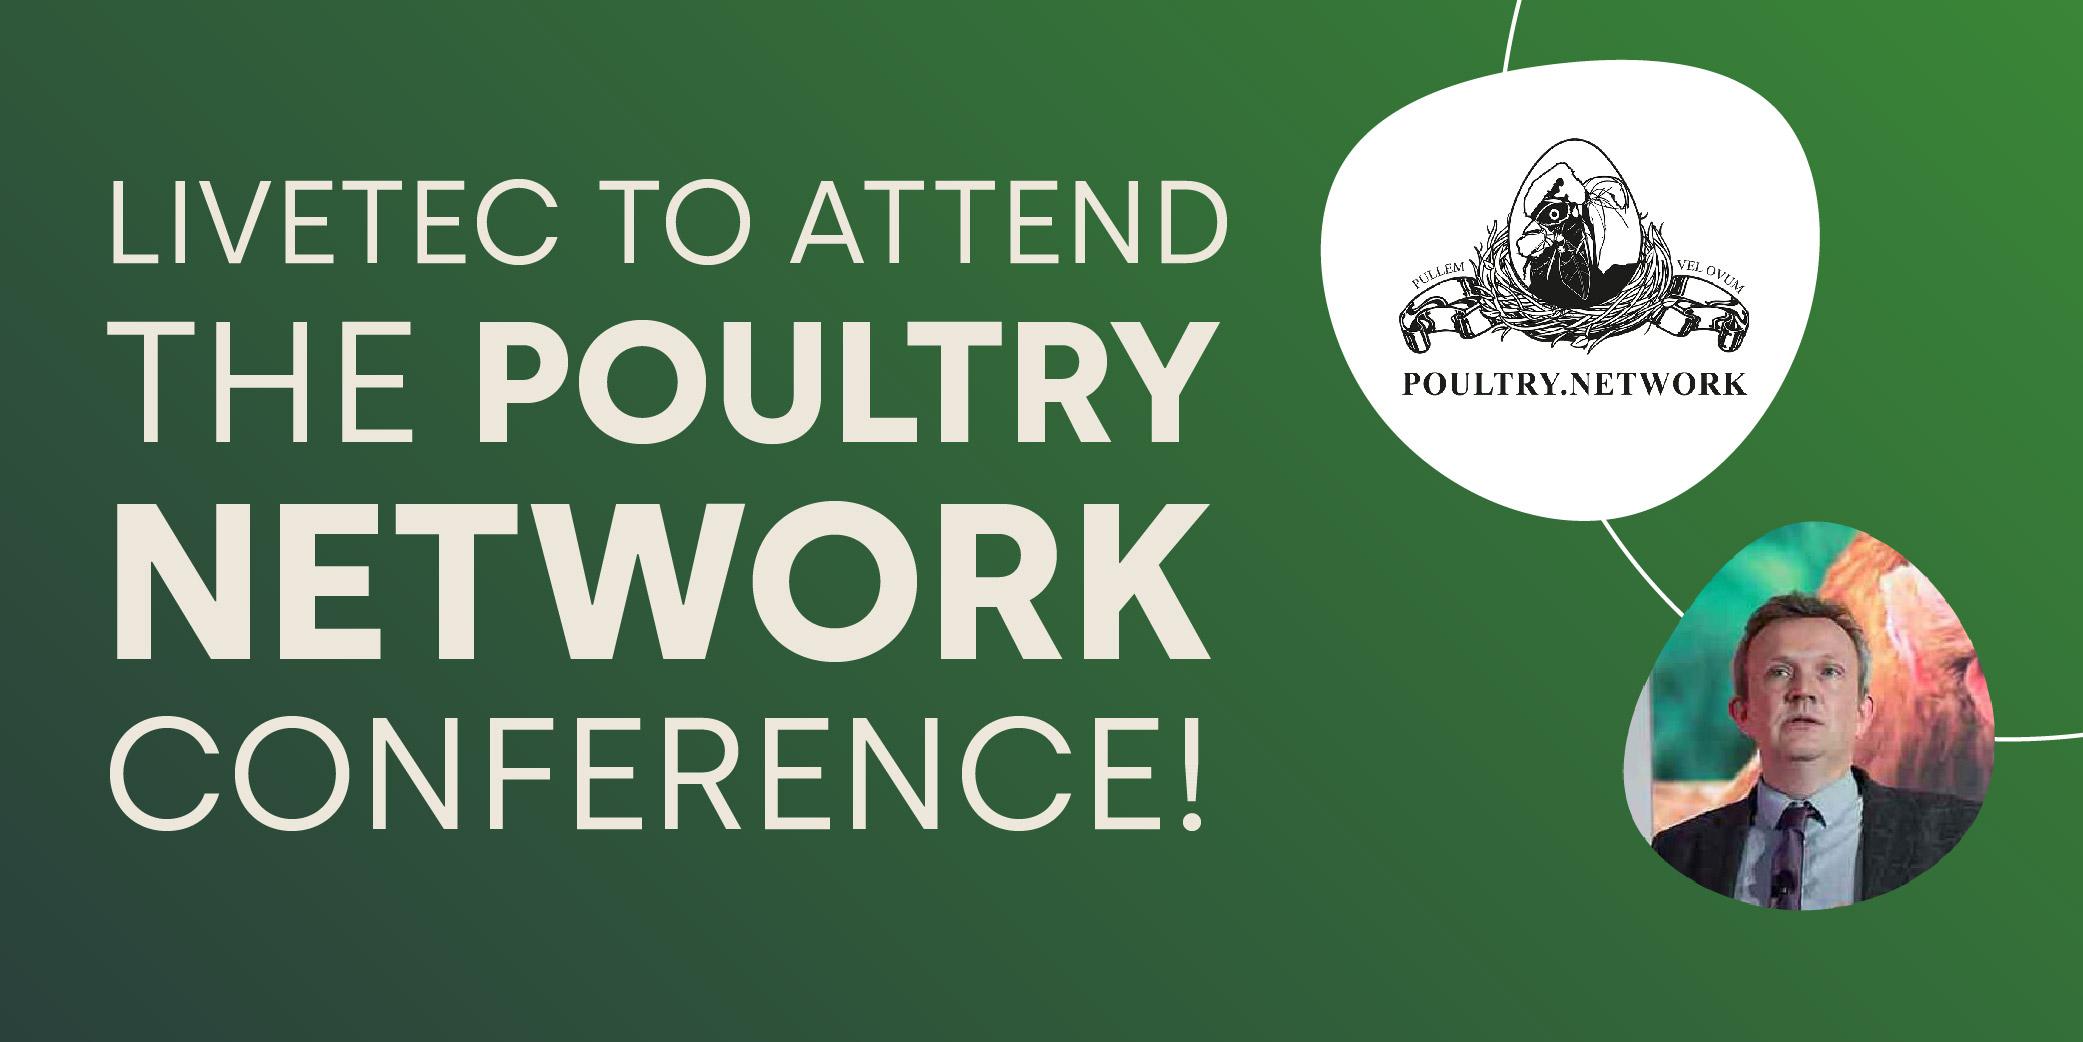 Livetec to attend Poultry Network Conference at the Harper Adams University campus on the 8th September 2022.